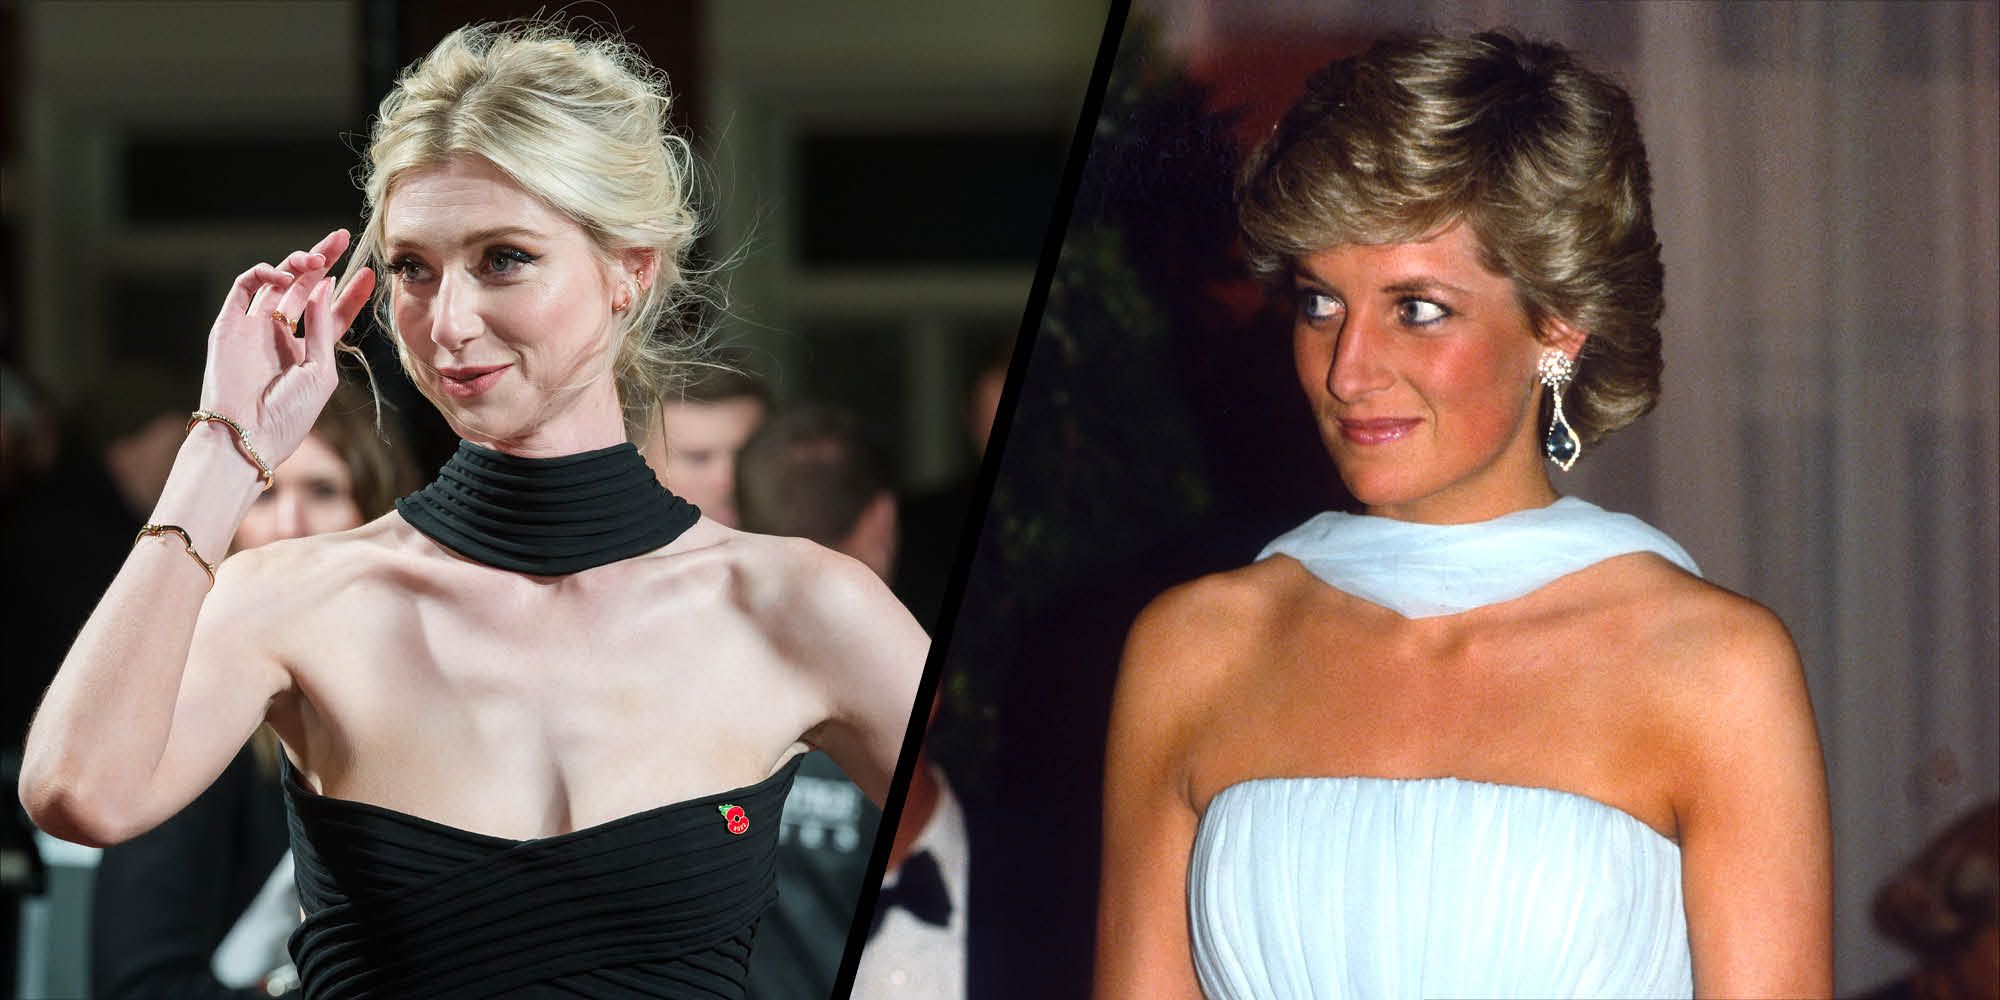 Yes, Princess Diana did wear that leopard swimsuit from The Crown